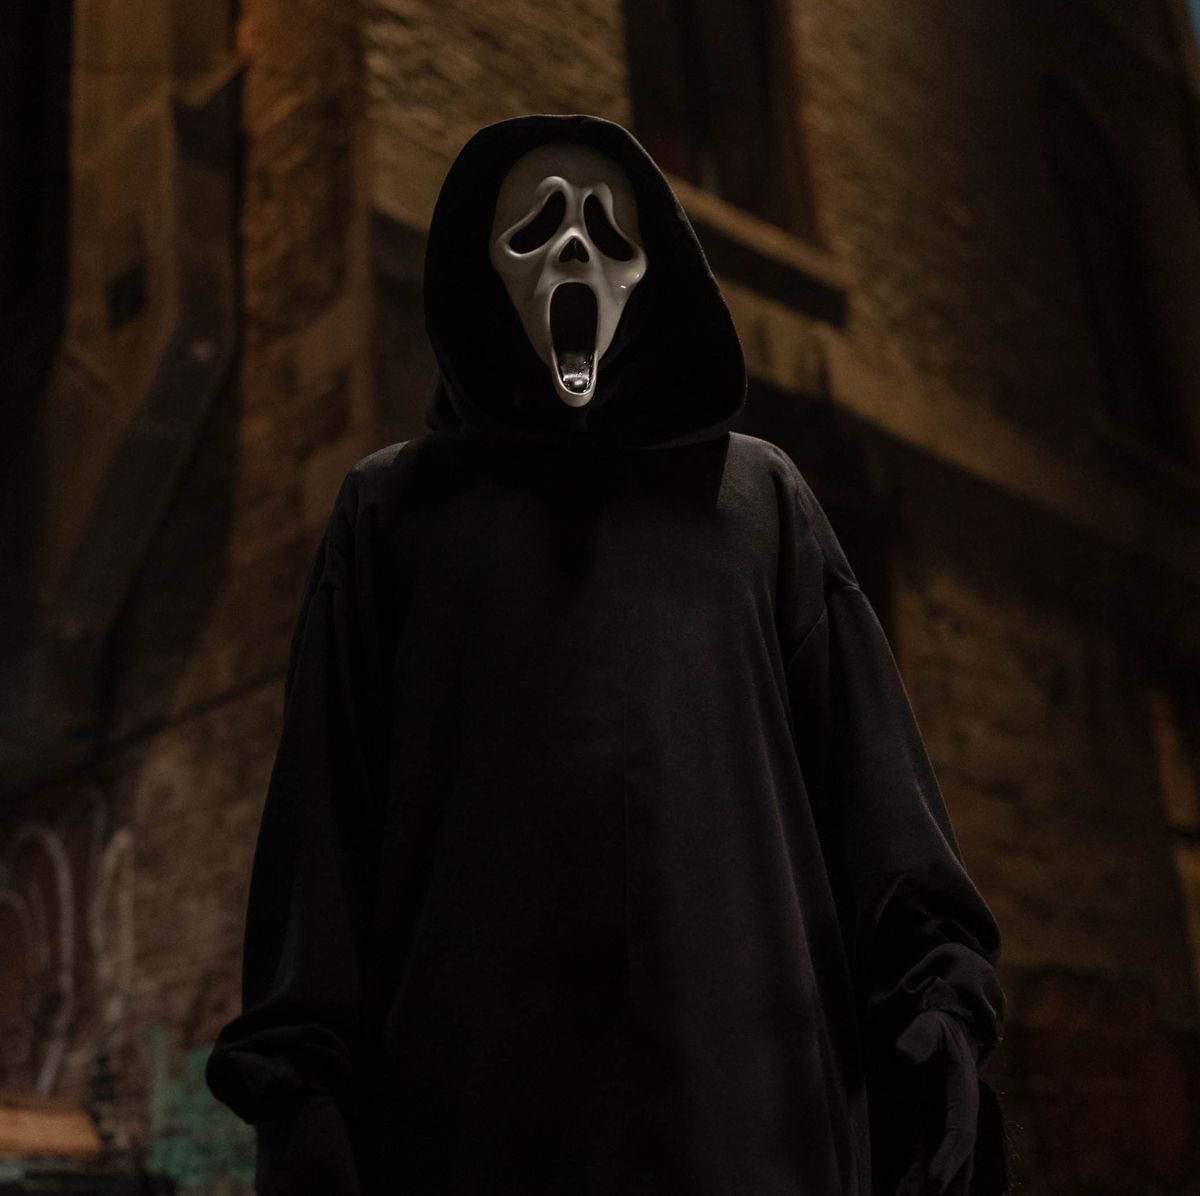 Scream 6 ending explained - Ghostface reveal is a Scream first